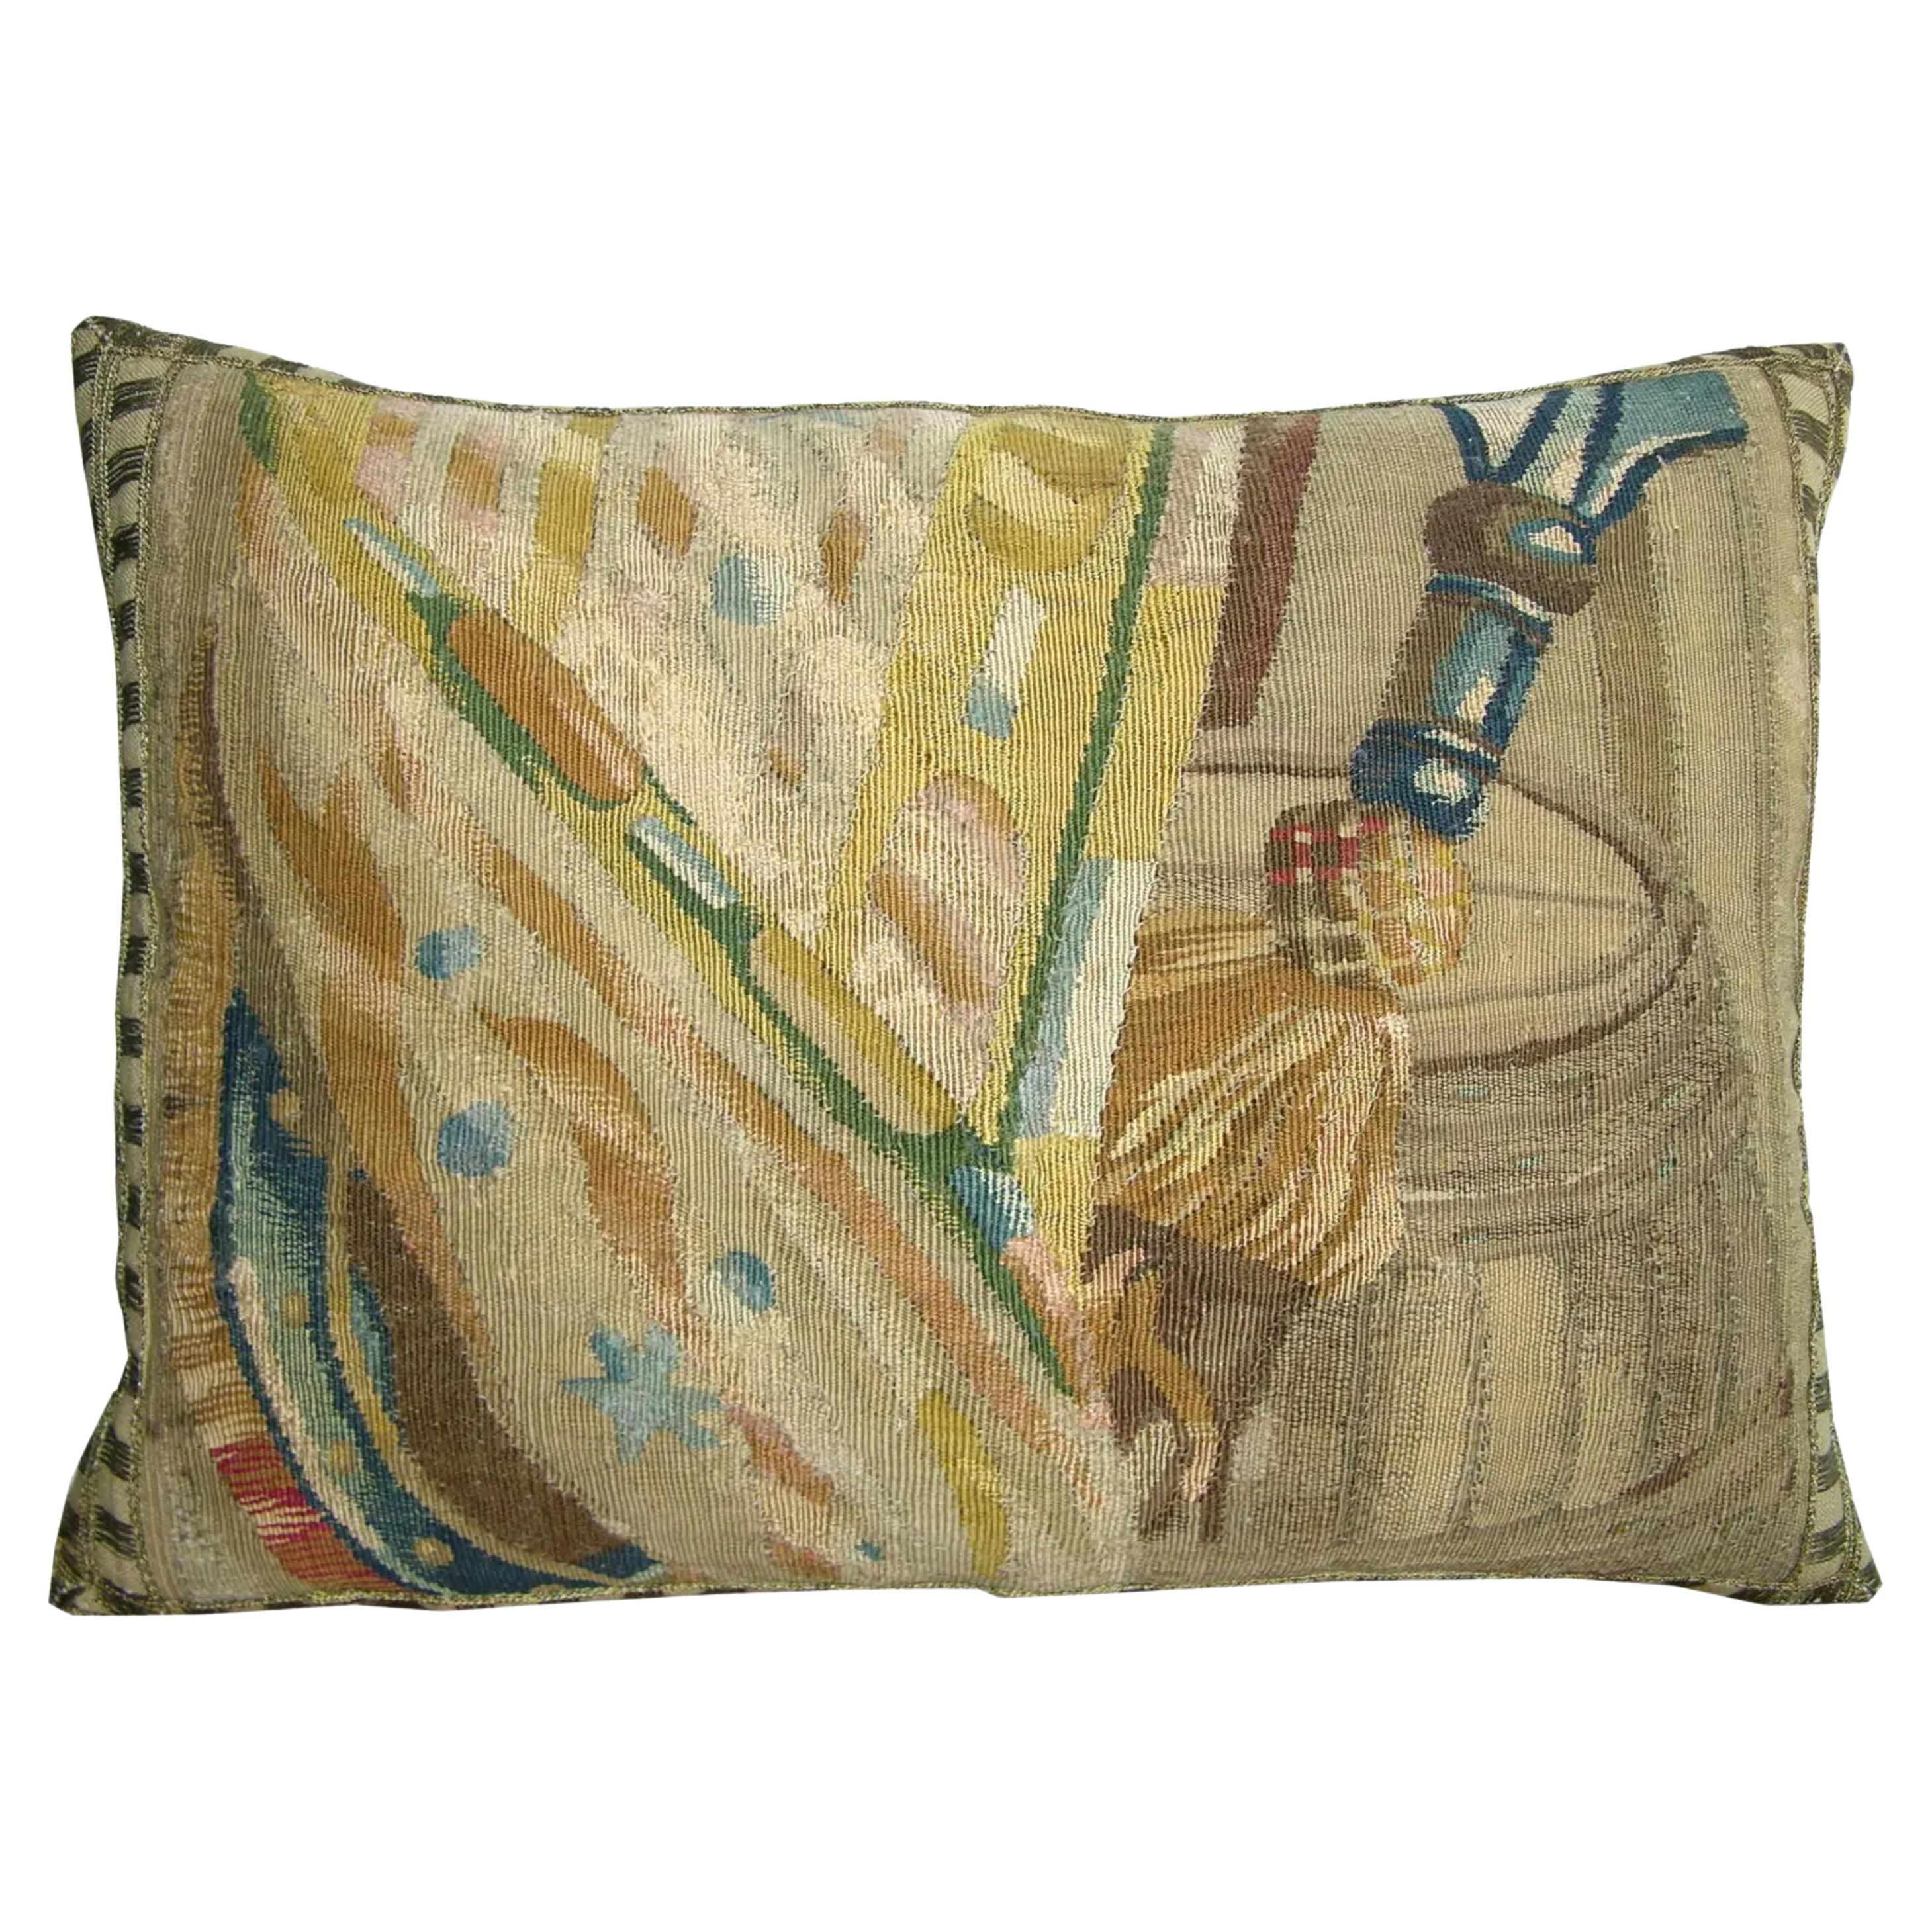 Ca.1700 Antique Brussels Tapestry Pillow 19'' X 14'' For Sale